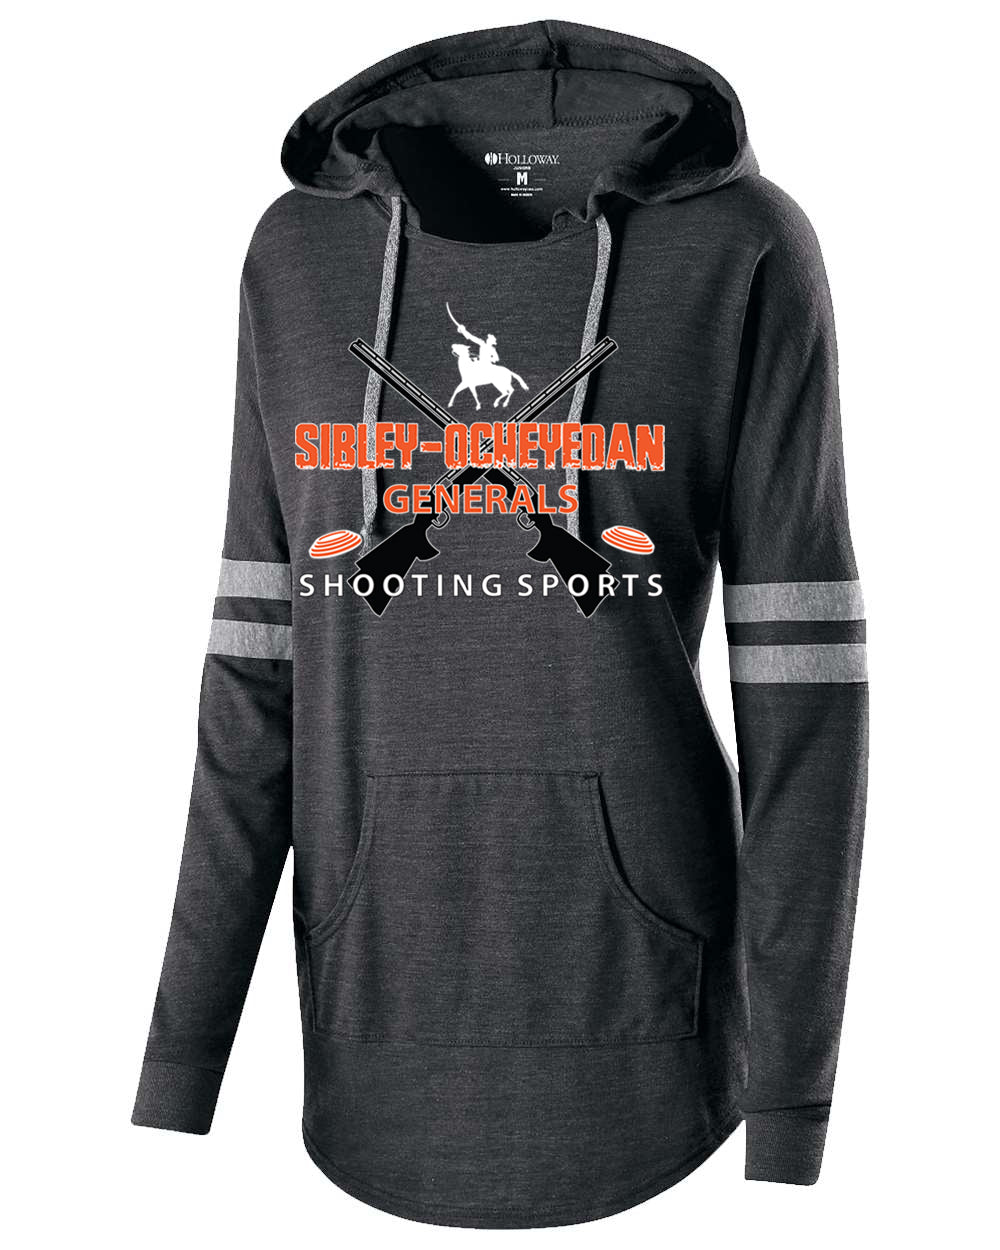 S-O Shooting Generals Lady Holloway Hooded Long Sleeve T-Shirt